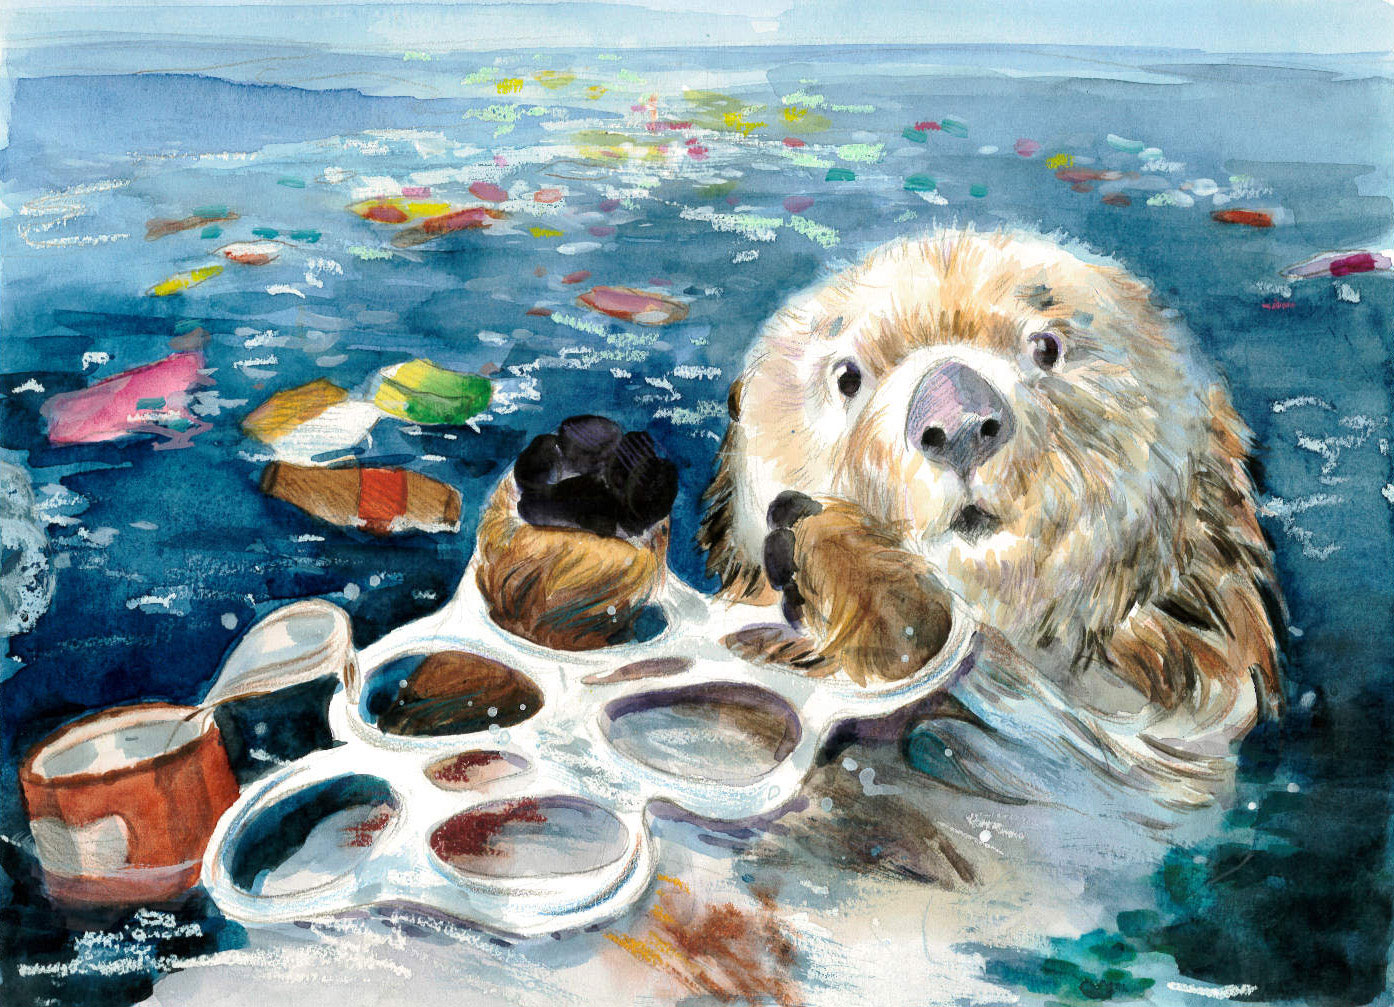 Sea otter floating amongst trash with six-pack rings around its paws, in mixed media